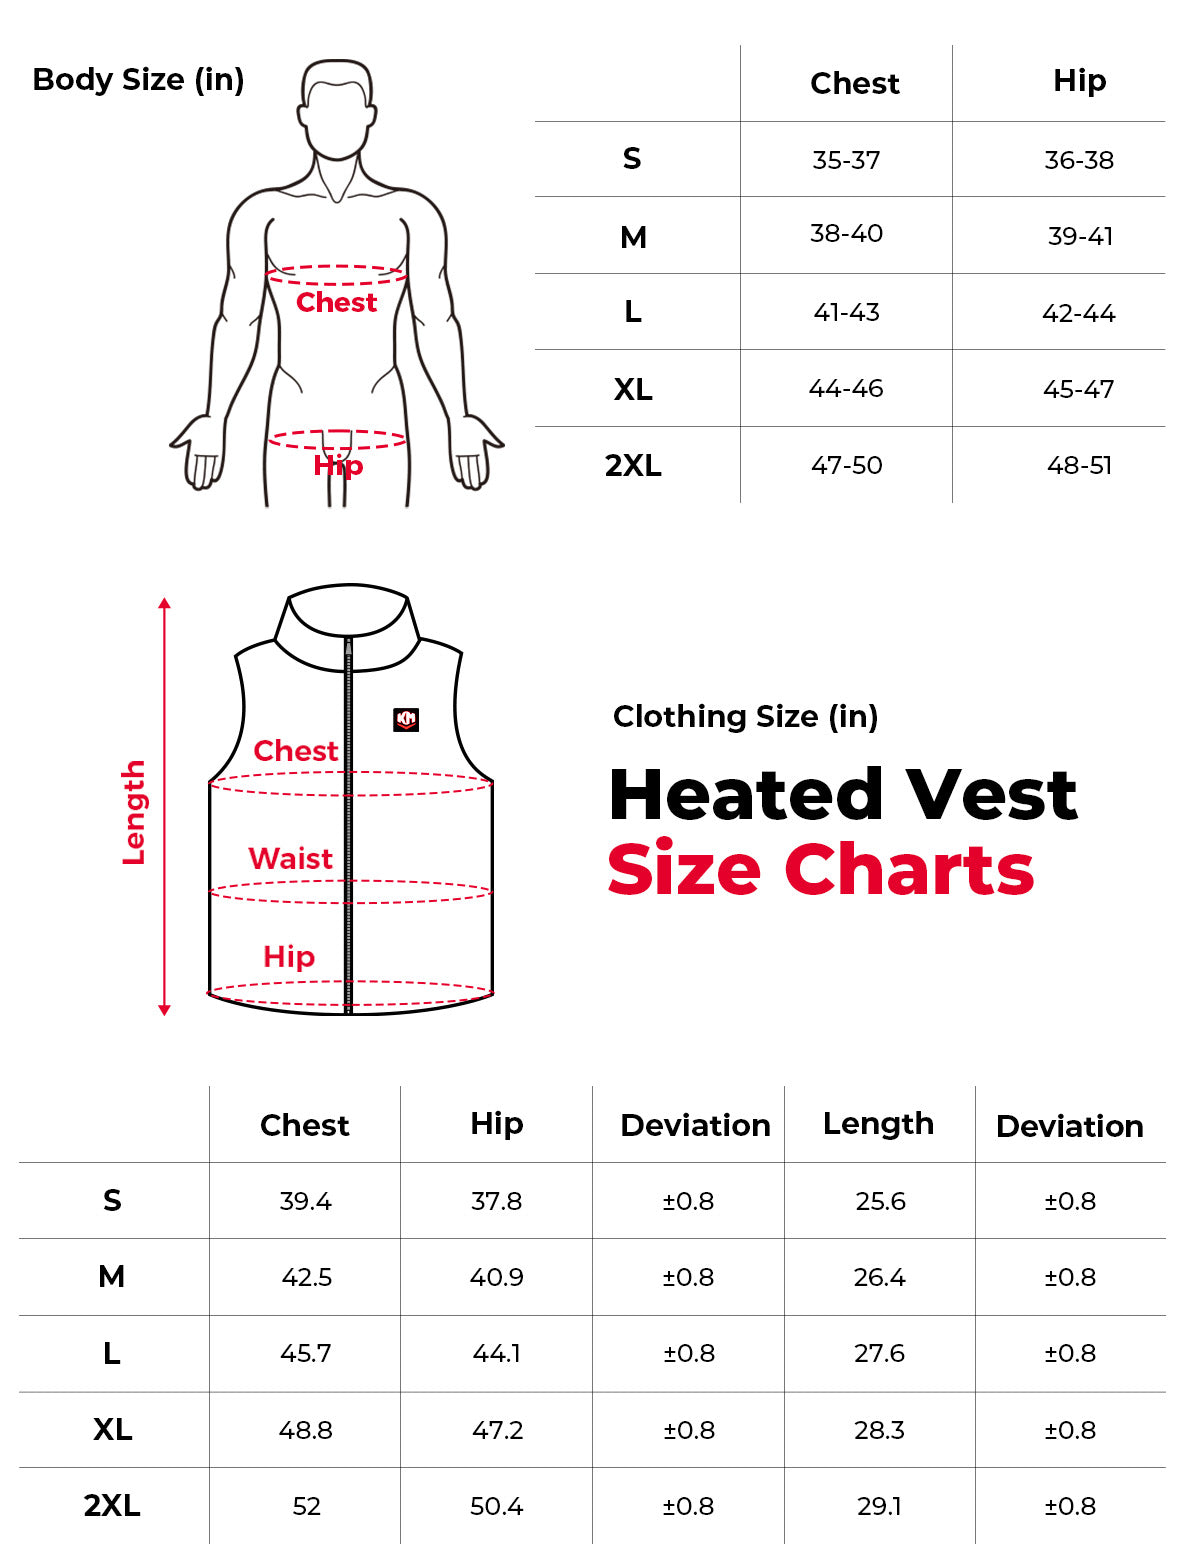 Lightweight Heated Vest for Men with Battery Pack Included